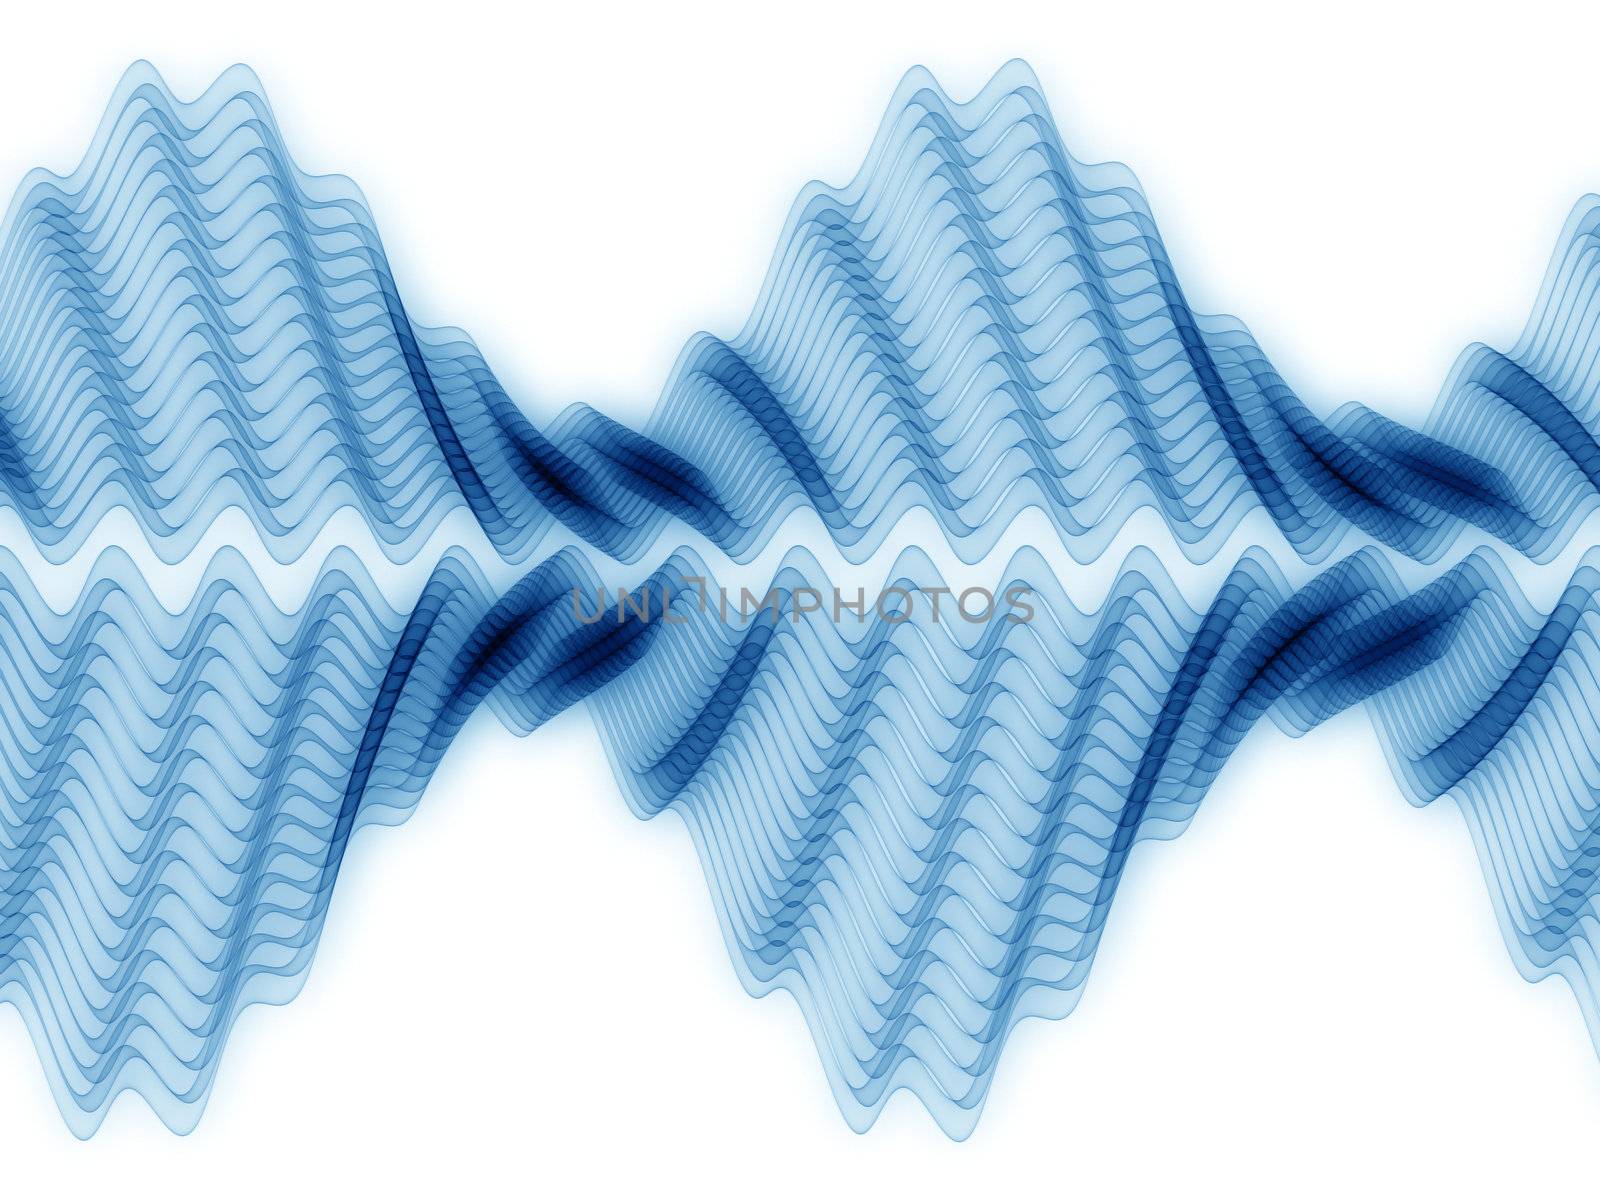 Abstract sine waves rendered in blue against white background